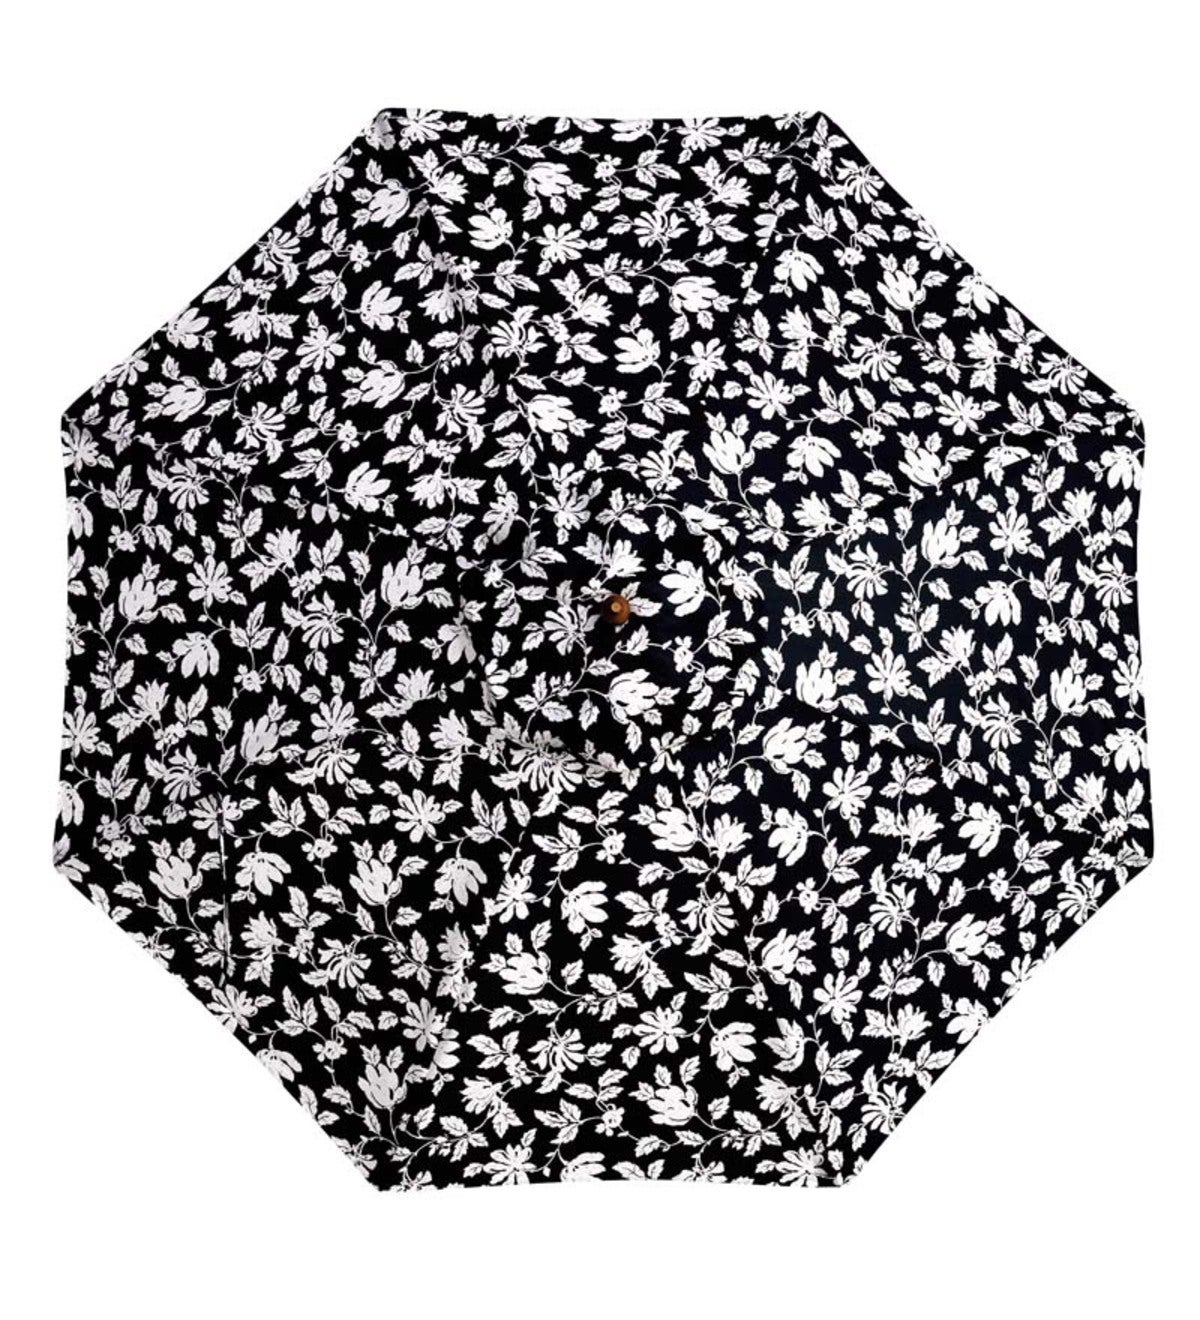 Sale! 9' Wooden Umbrella With Pulley - Black Damask